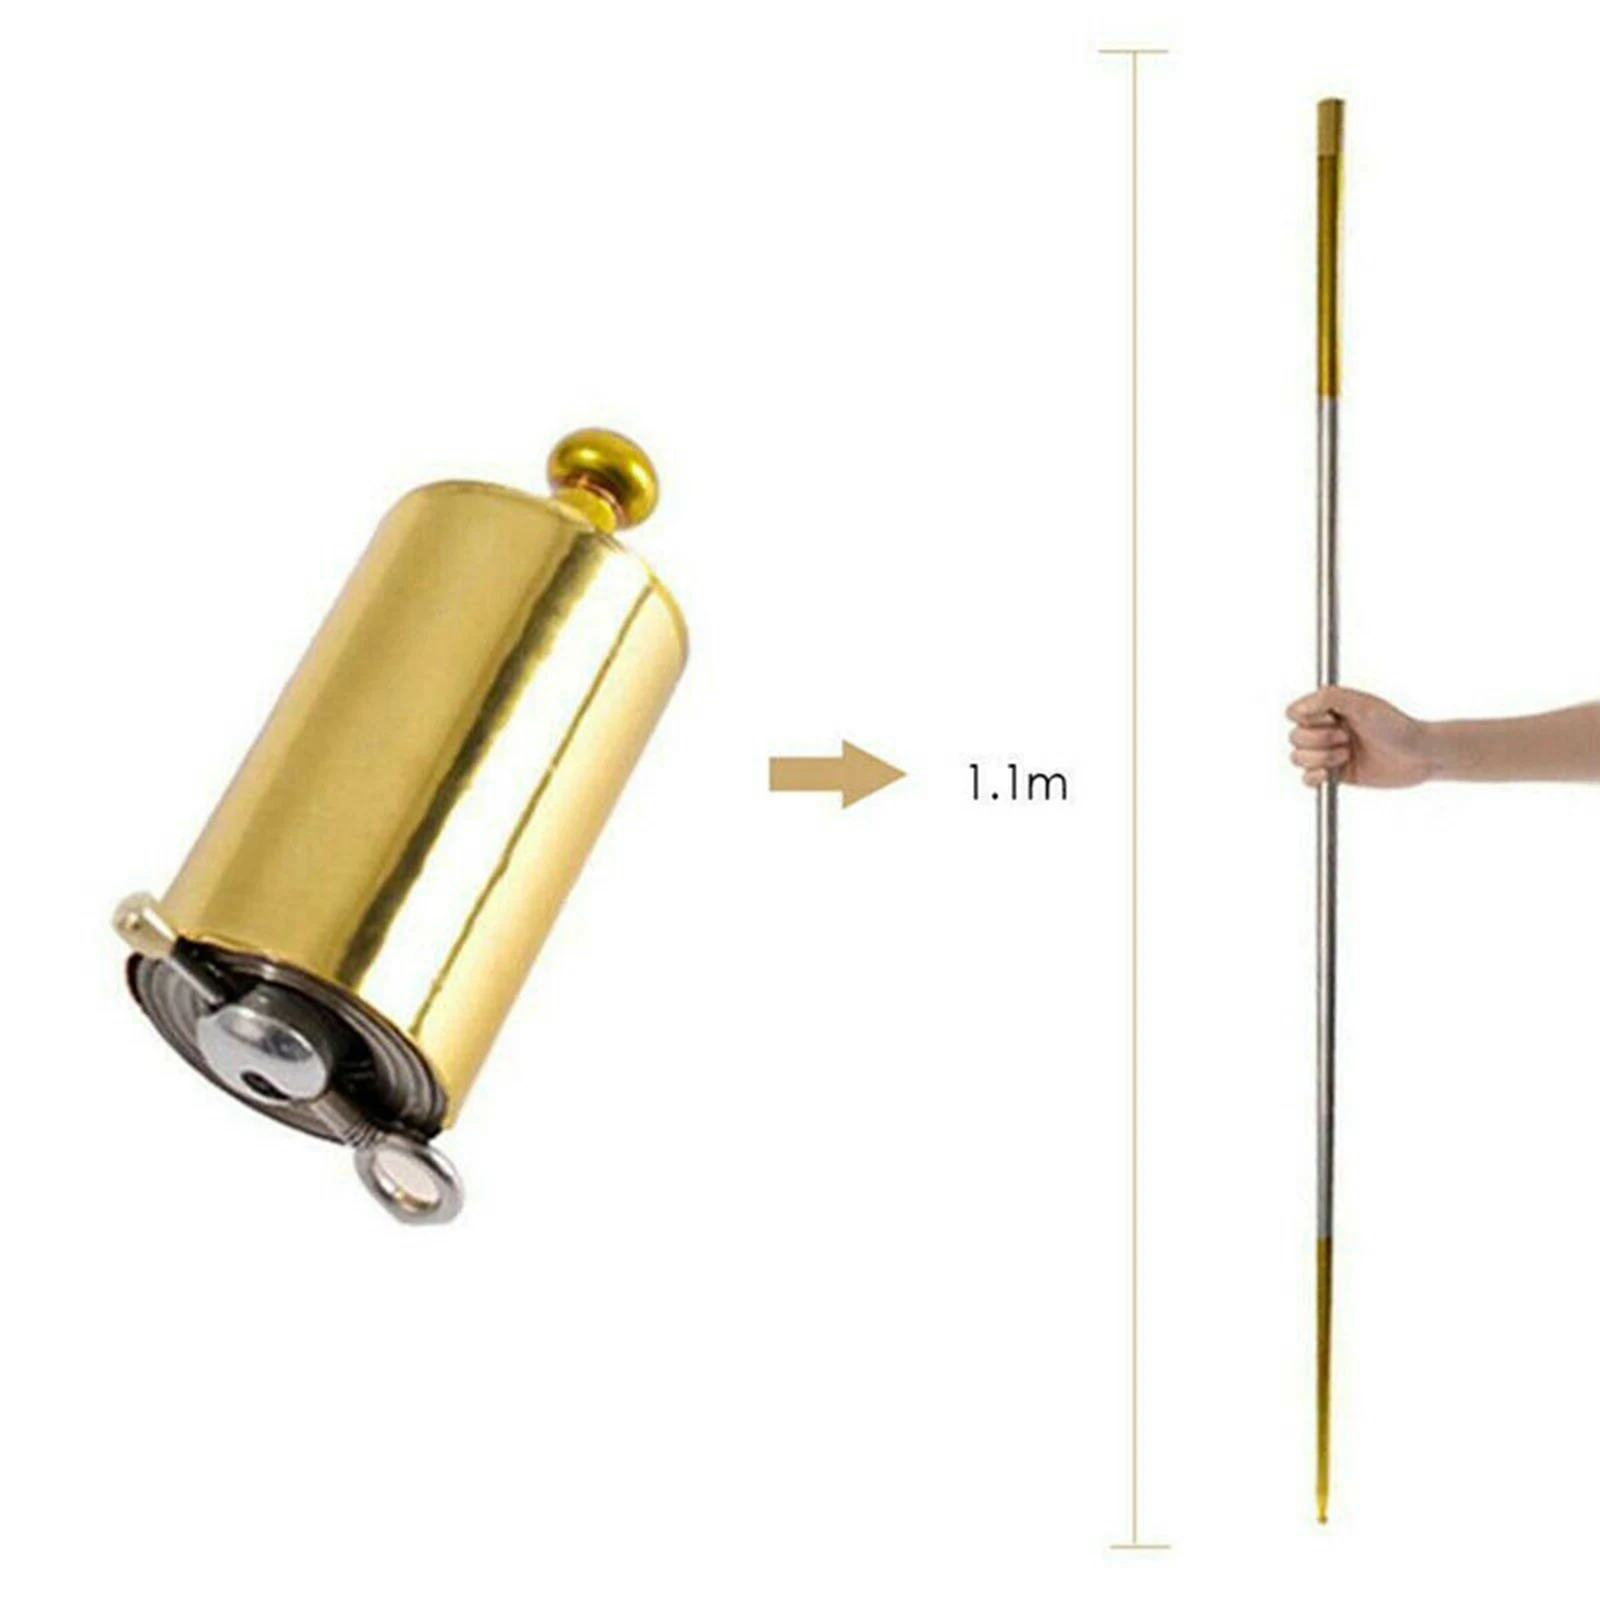 Portable Pocket Staff Steel Outdoor Sport Magical Wand Tricks Stage Trick Gimmick Magician Wand 110cm